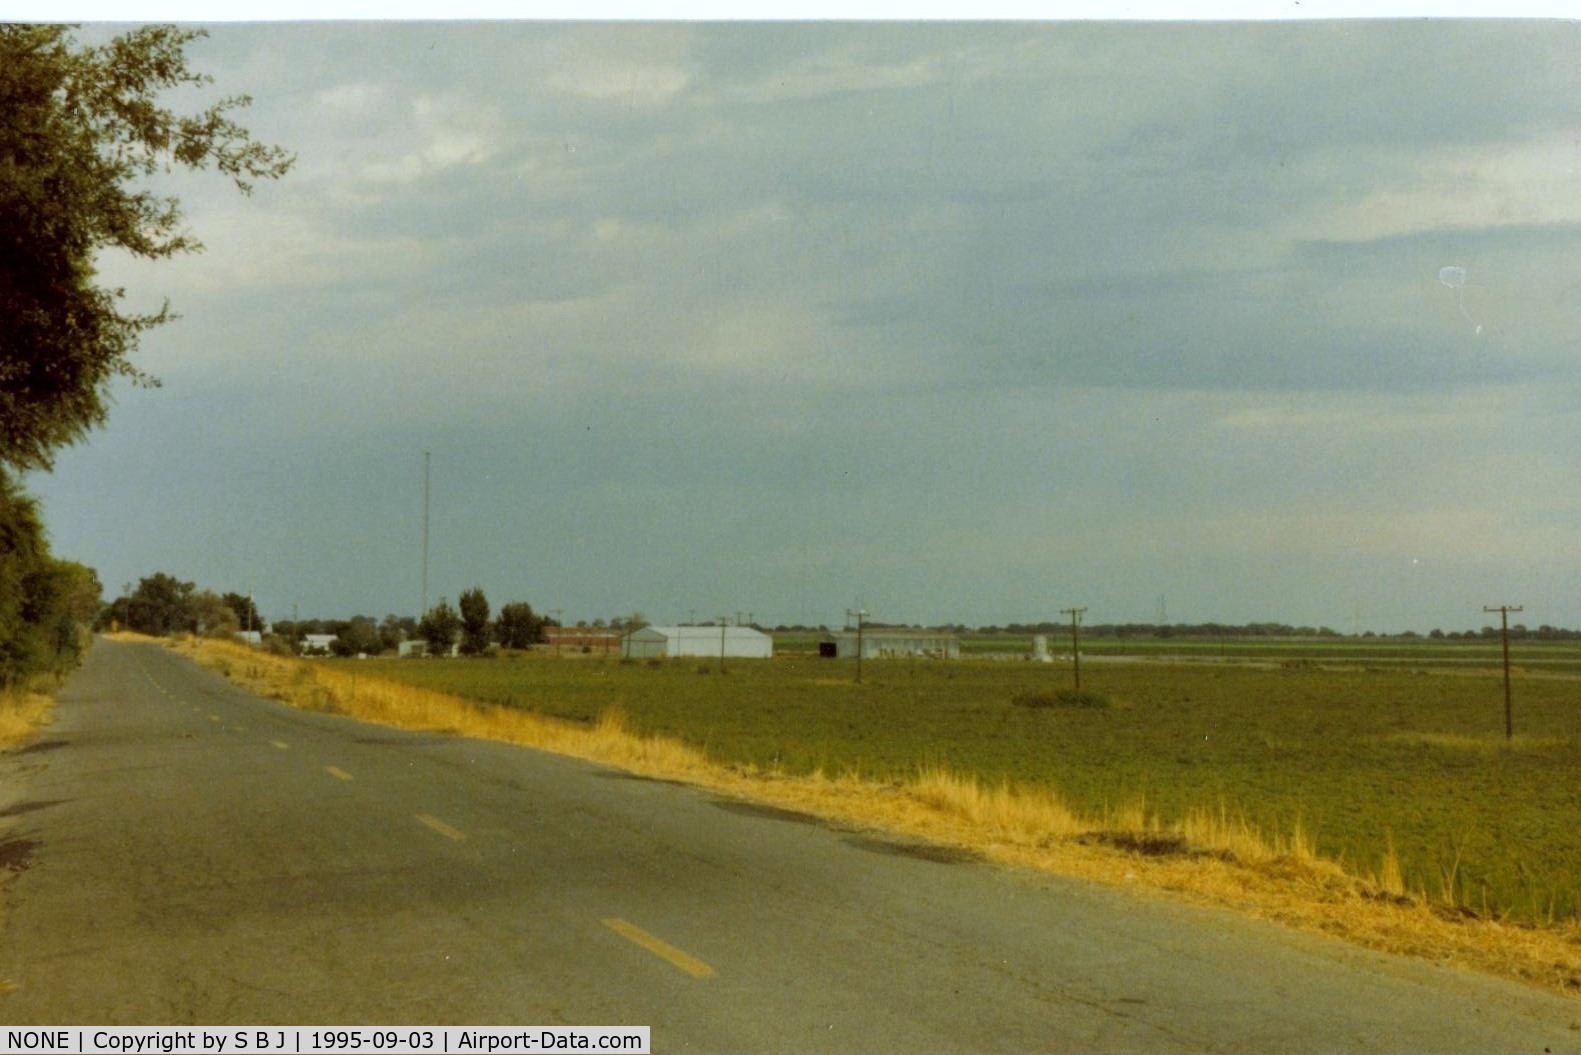 NONE Airport - Haley Ag strip north of Tracy,Ca.near the Sacramento delta.Was able to use it when I kept a boat at a near by marina.Runway is parallel to levee road.Large tower is wires crossing river.My C150 can almost be seen. View is east.